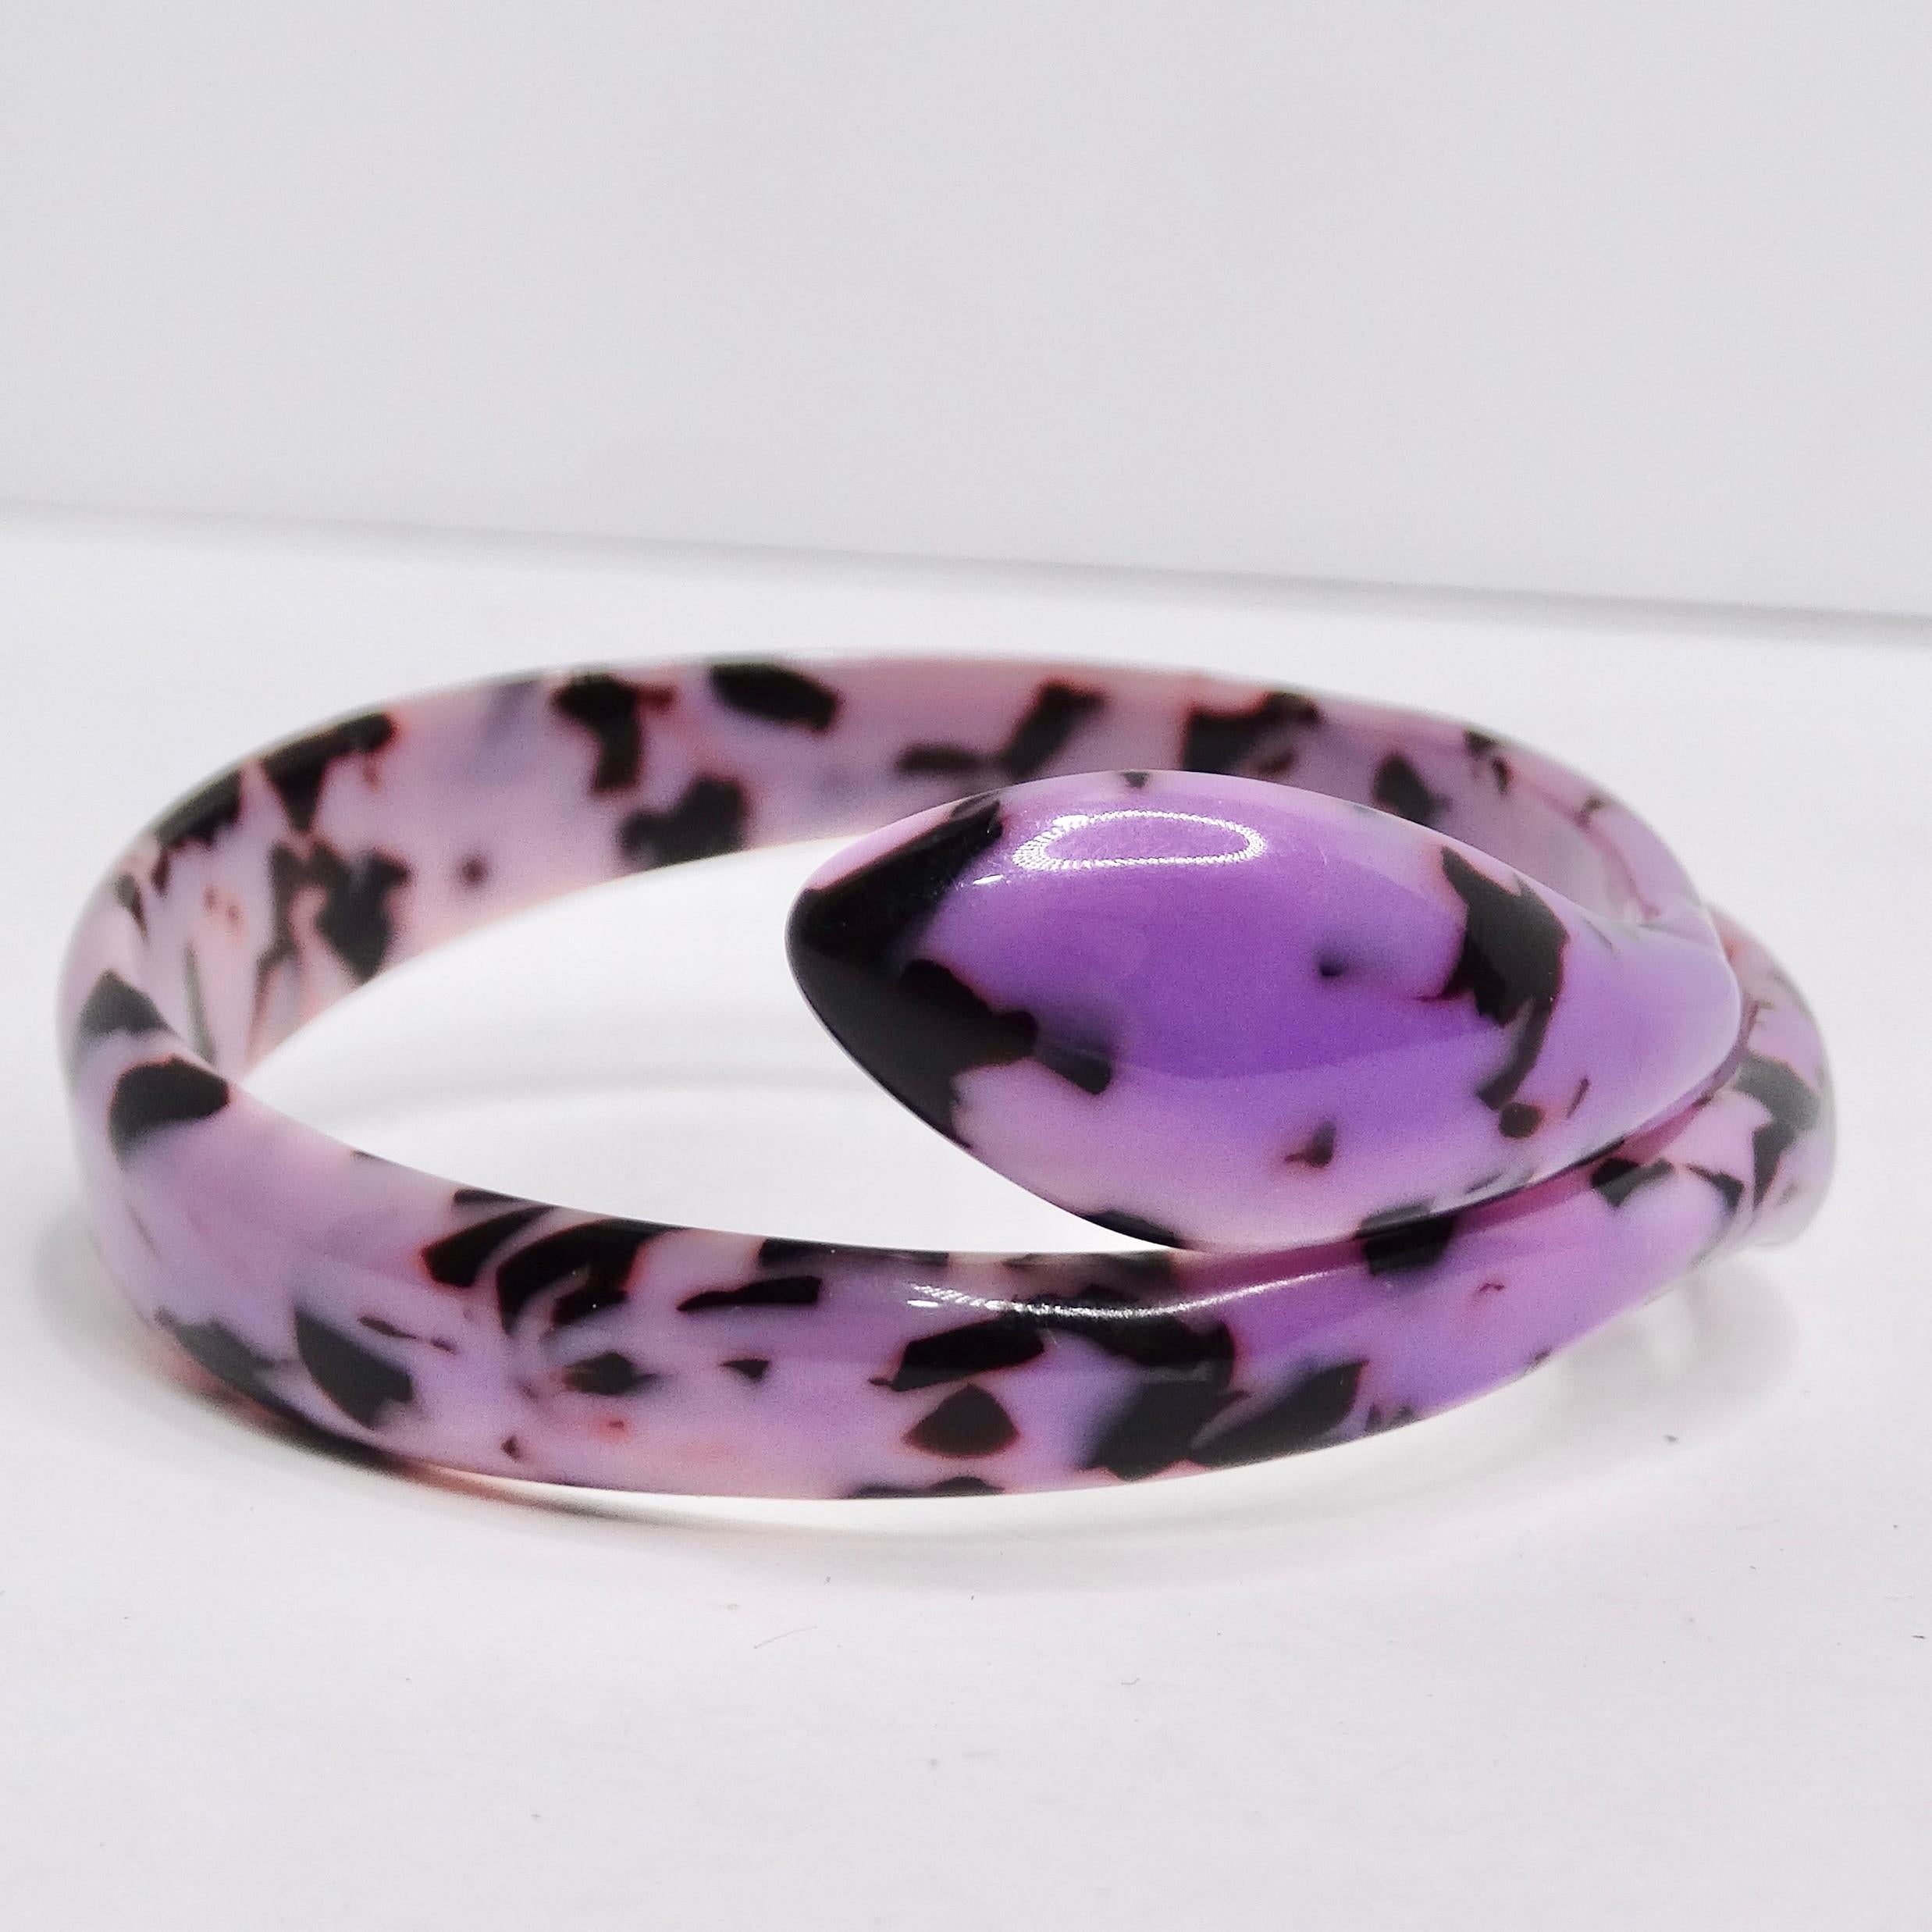 Unleash your inner serpent enthusiast and elevate your style with our exquisite Purple Bakelite Snake Head Cuff Bracelet. Crafted in the 1980s, this striking cuff bracelet is a true masterpiece, combining gorgeous purple bakelite with intricately